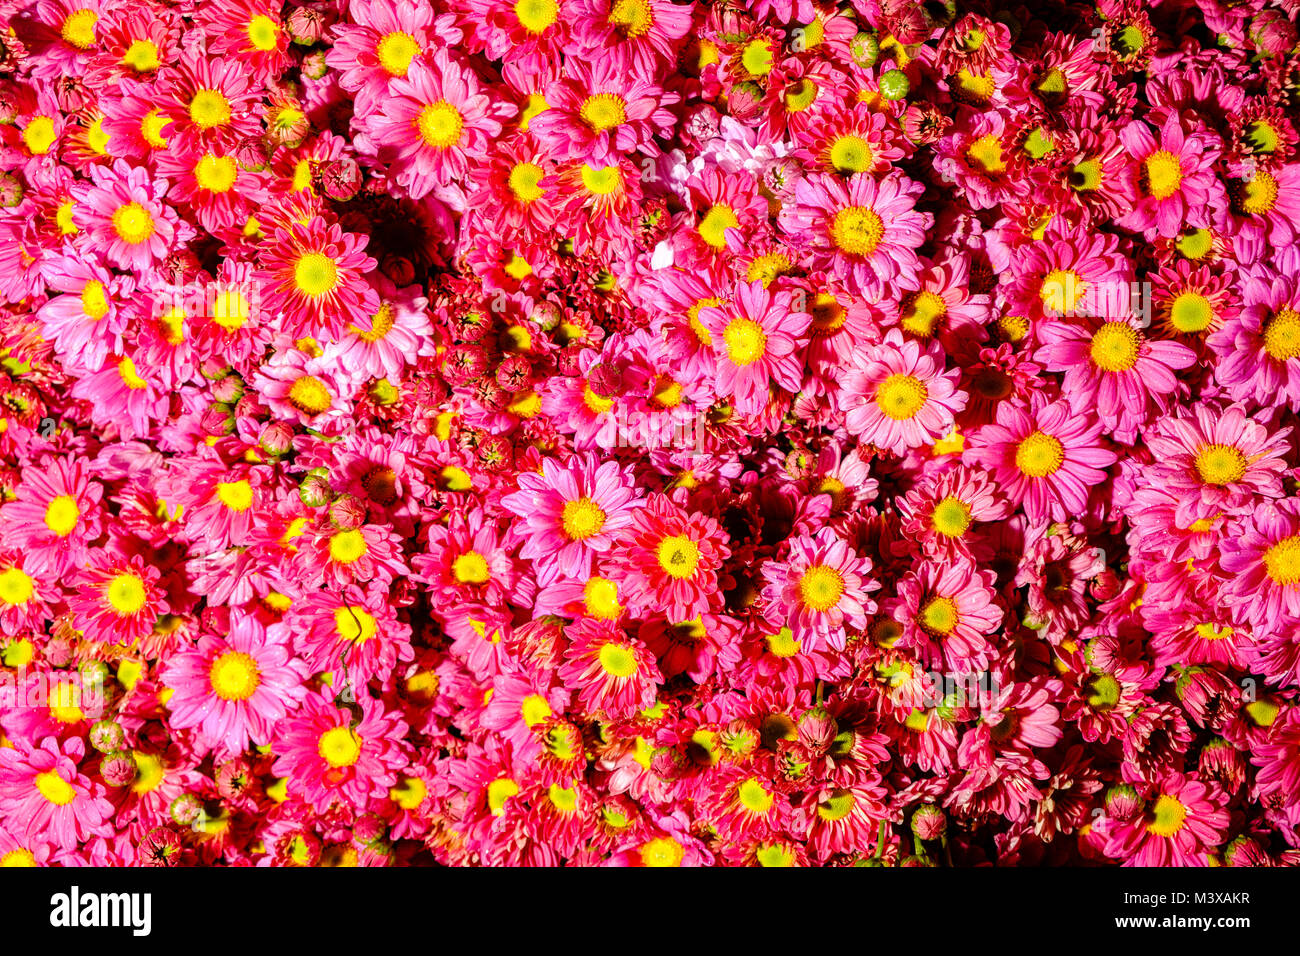 Red asters (Aster oblongifolius) are for sale at the flower market in the streets of town Stock Photo